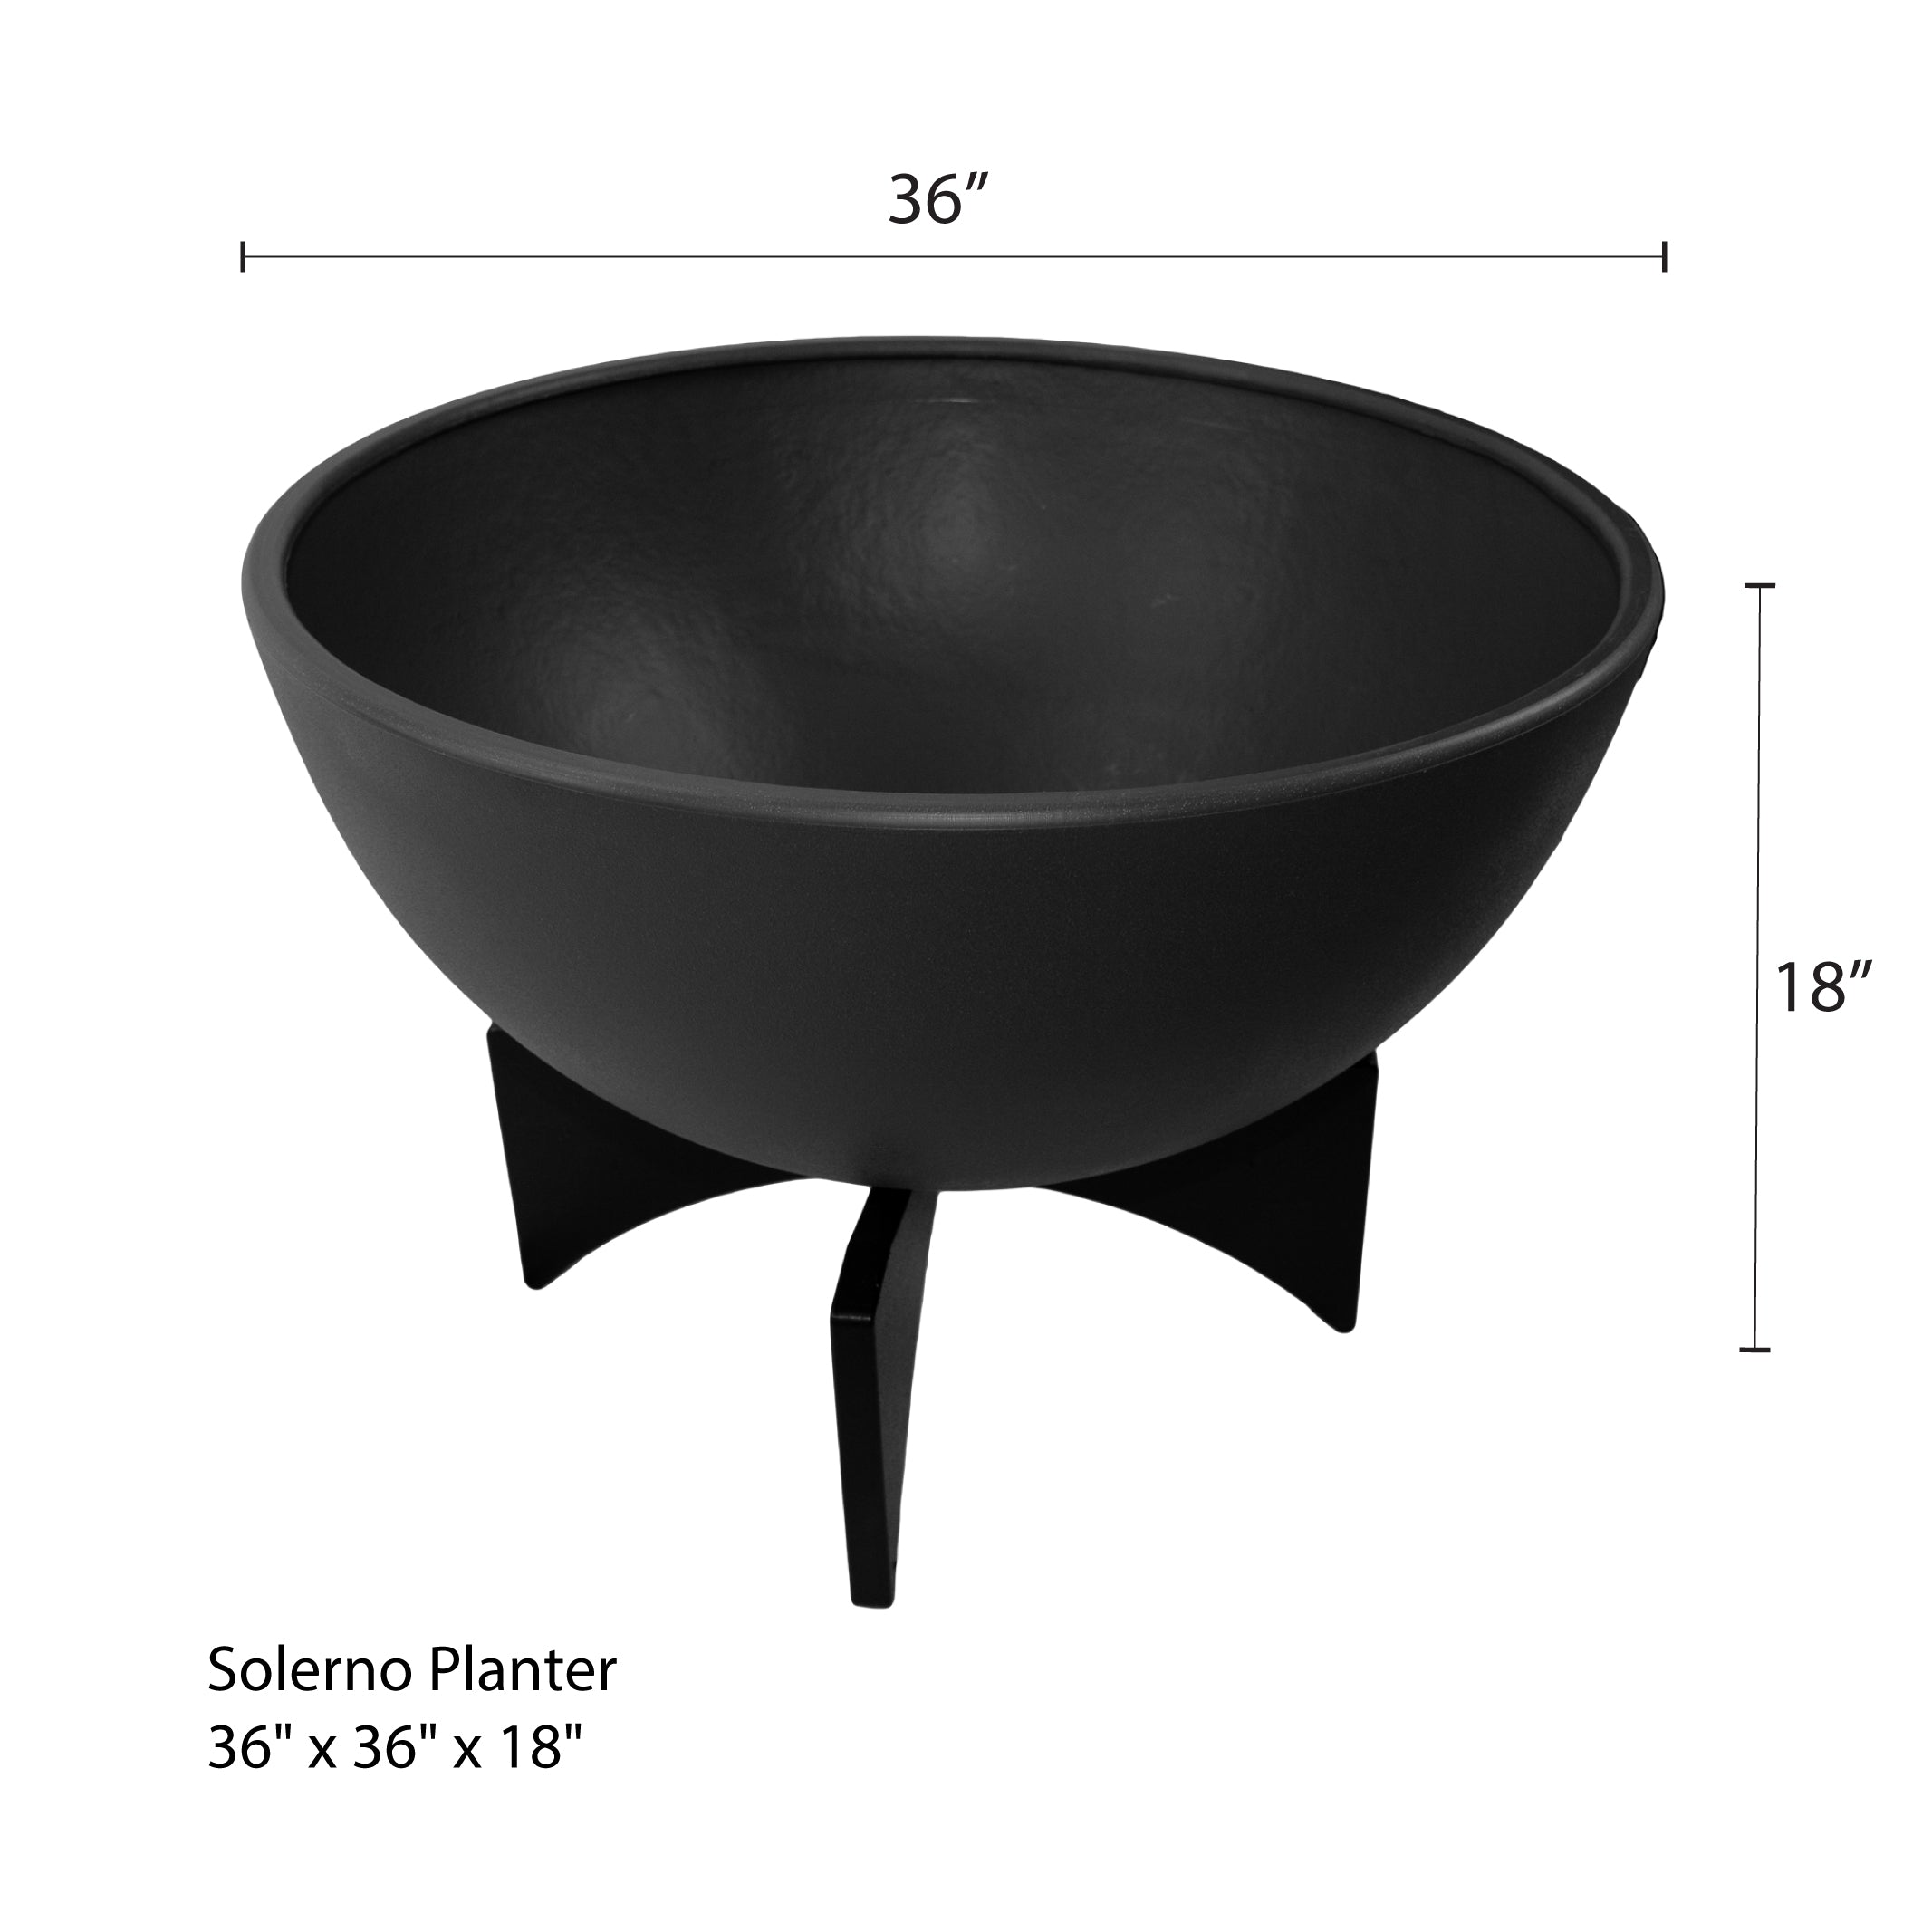 Black half dome solerno planter with measurements (large)